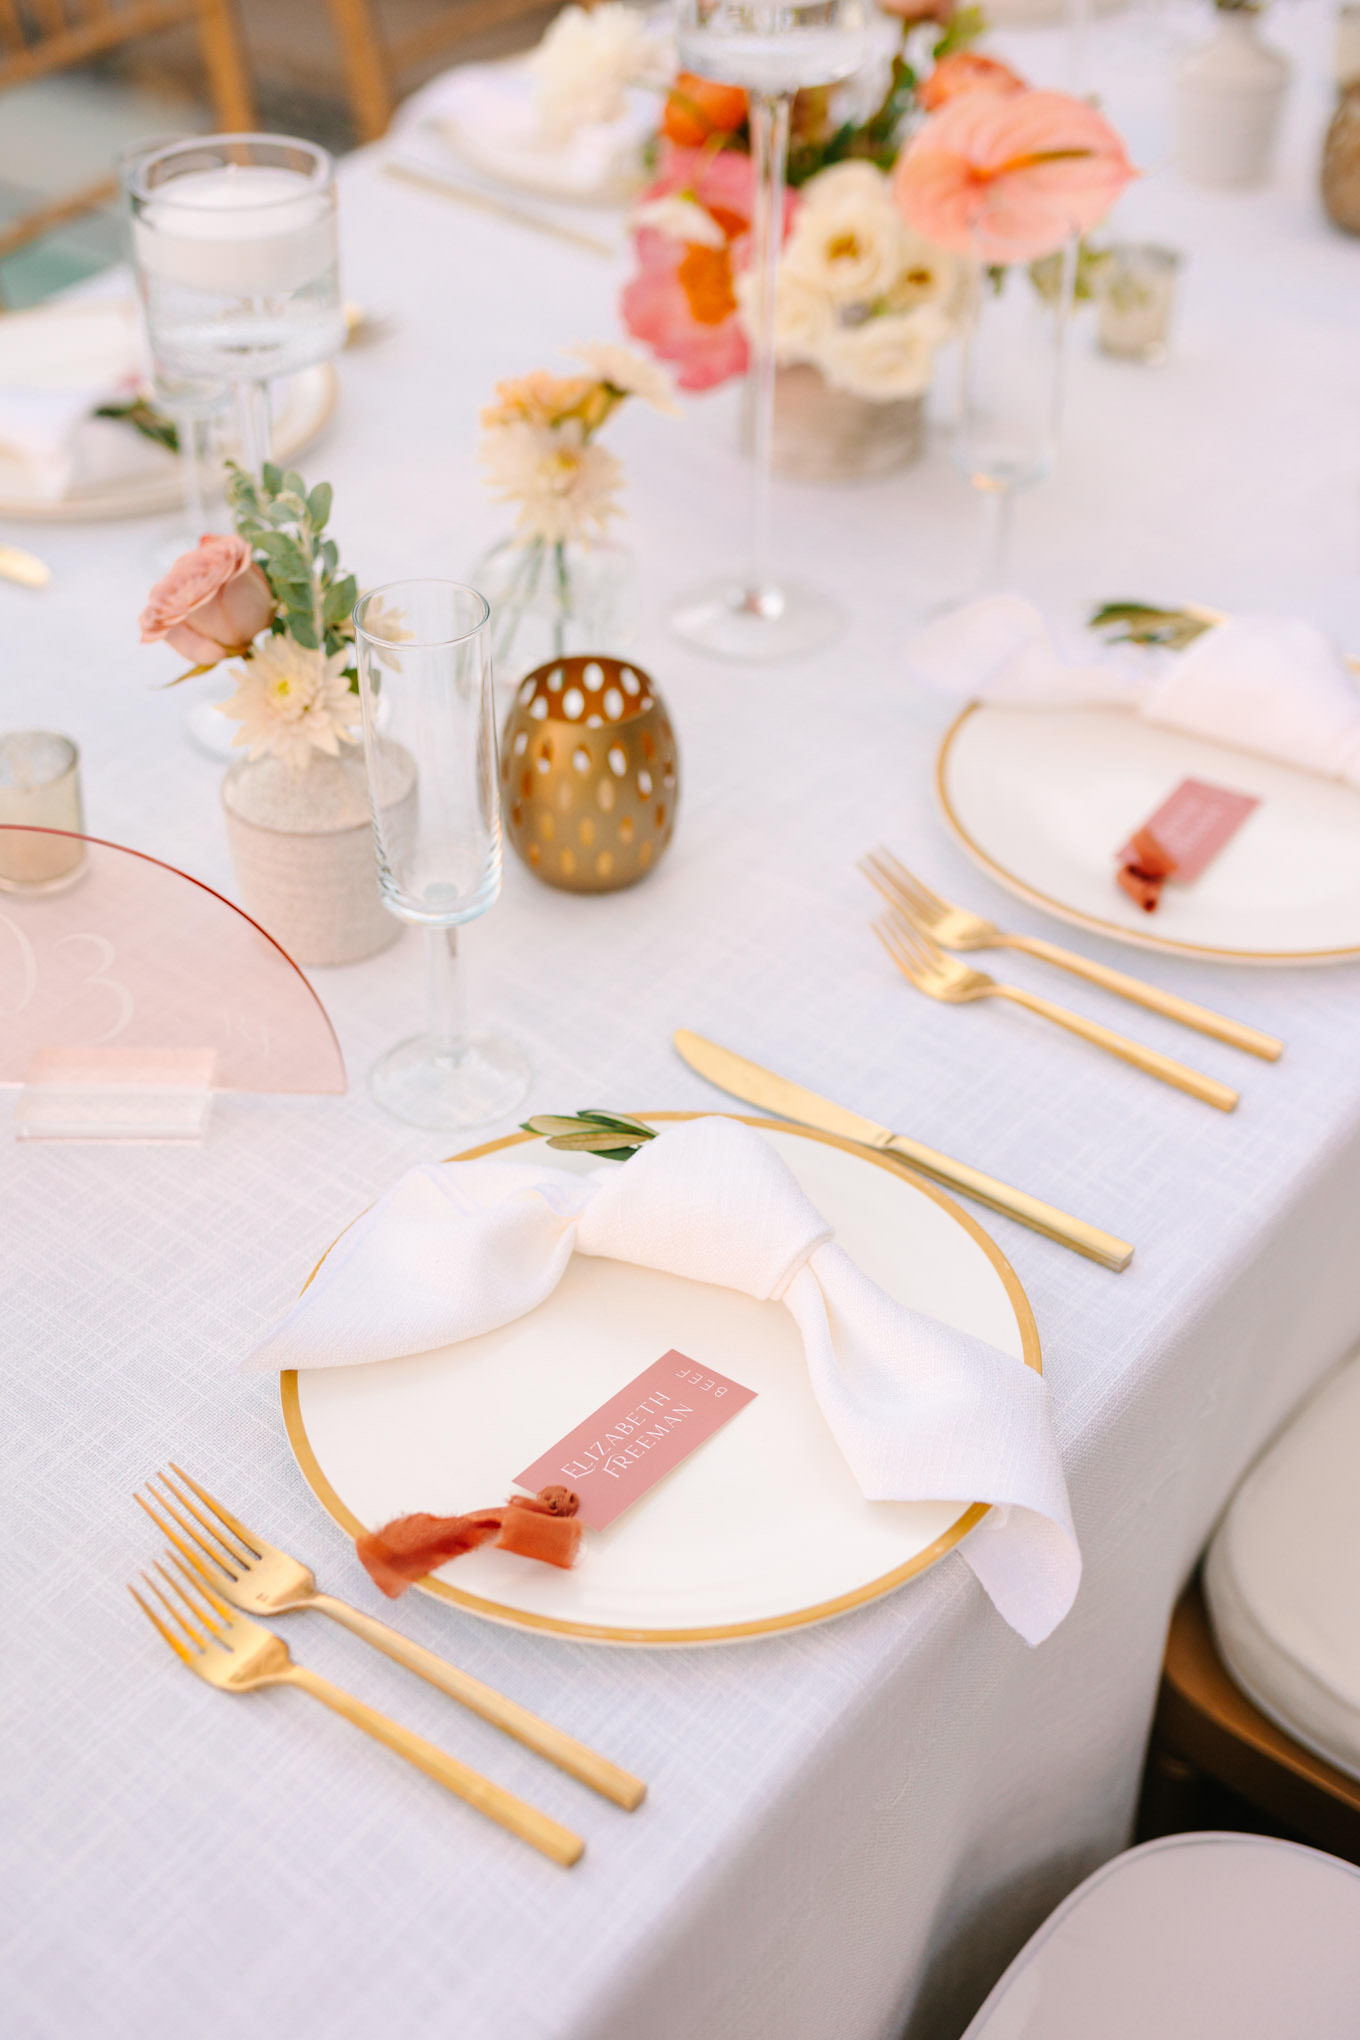 Reception place settings | Pink Bougainvillea Estate wedding | Colorful LA wedding photography | #bougainvilleaestate #palmspringswedding #palmspringsweddingvenue #palmspringsphotographer Source: Mary Costa Photography | Los Angeles